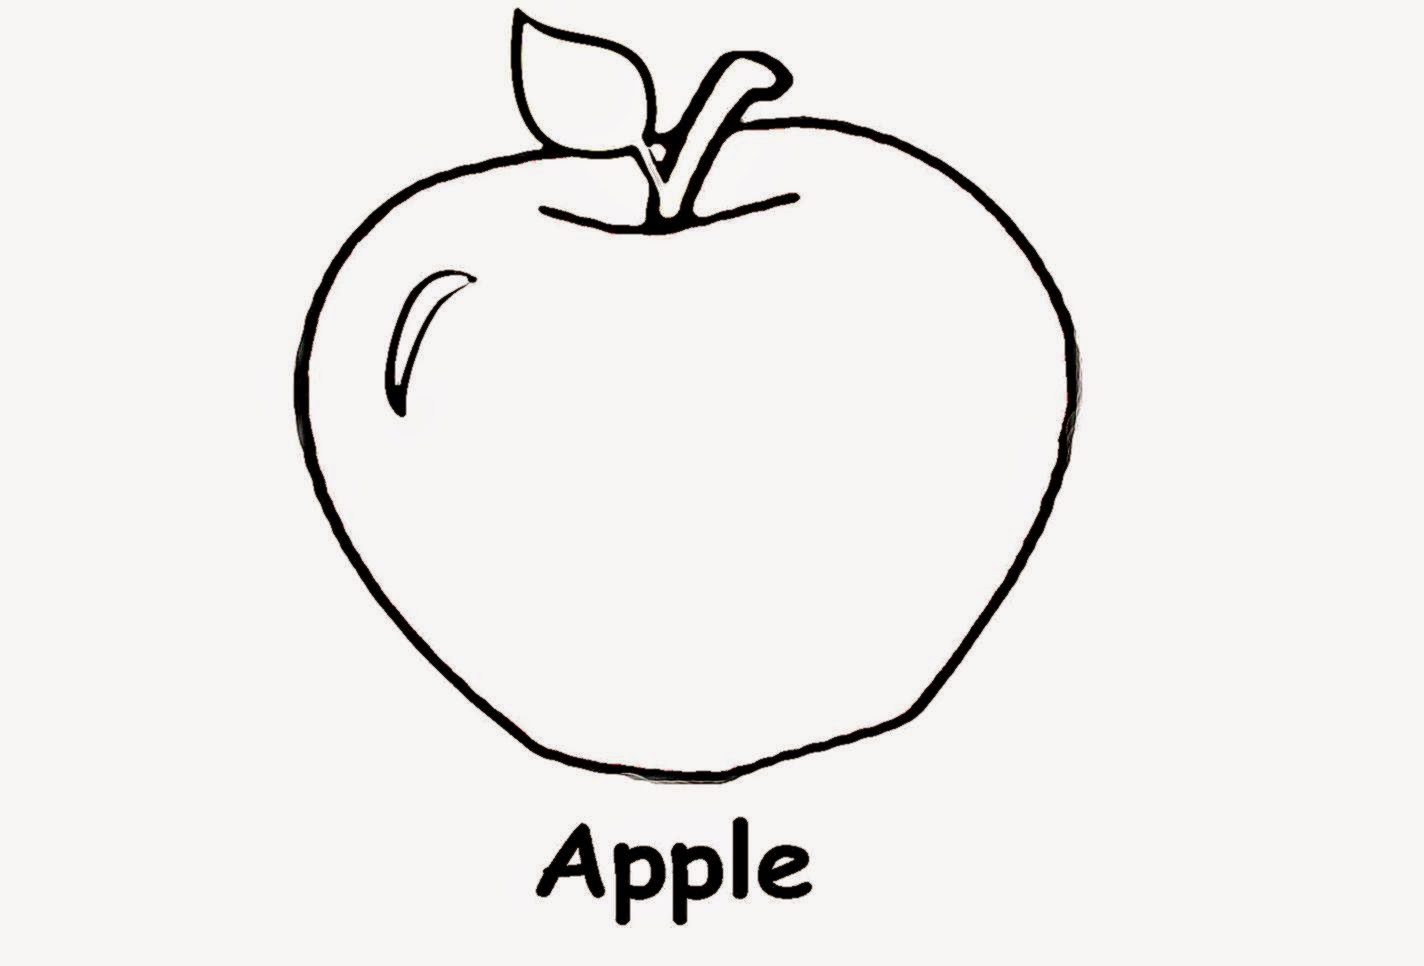 Pictures Of Apples To Color | Free Coloring Pictures